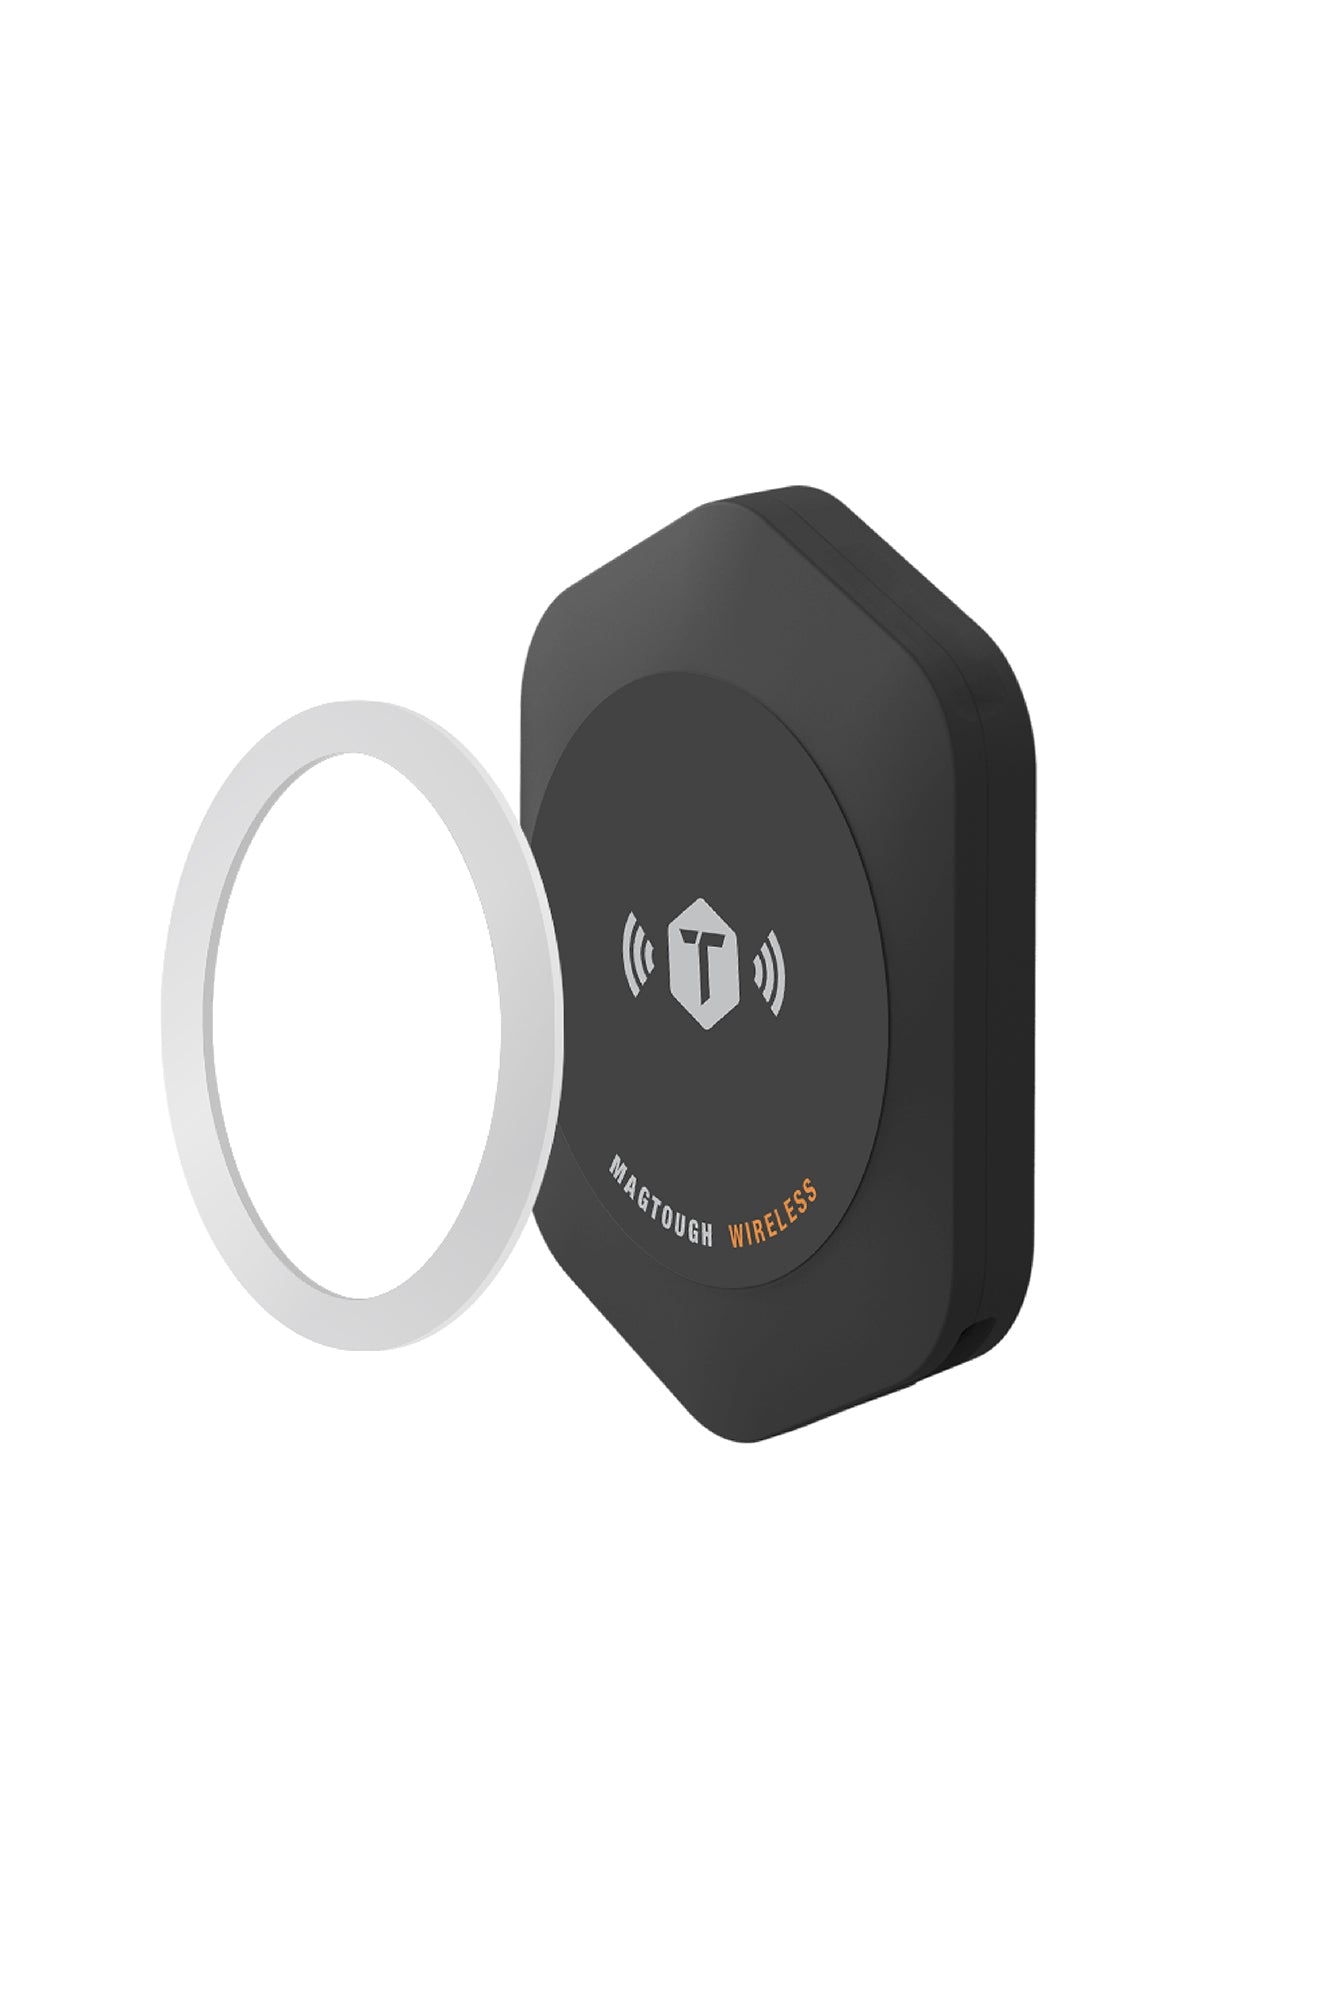 MagTough 15w Wireless Charging Magnetic Dock